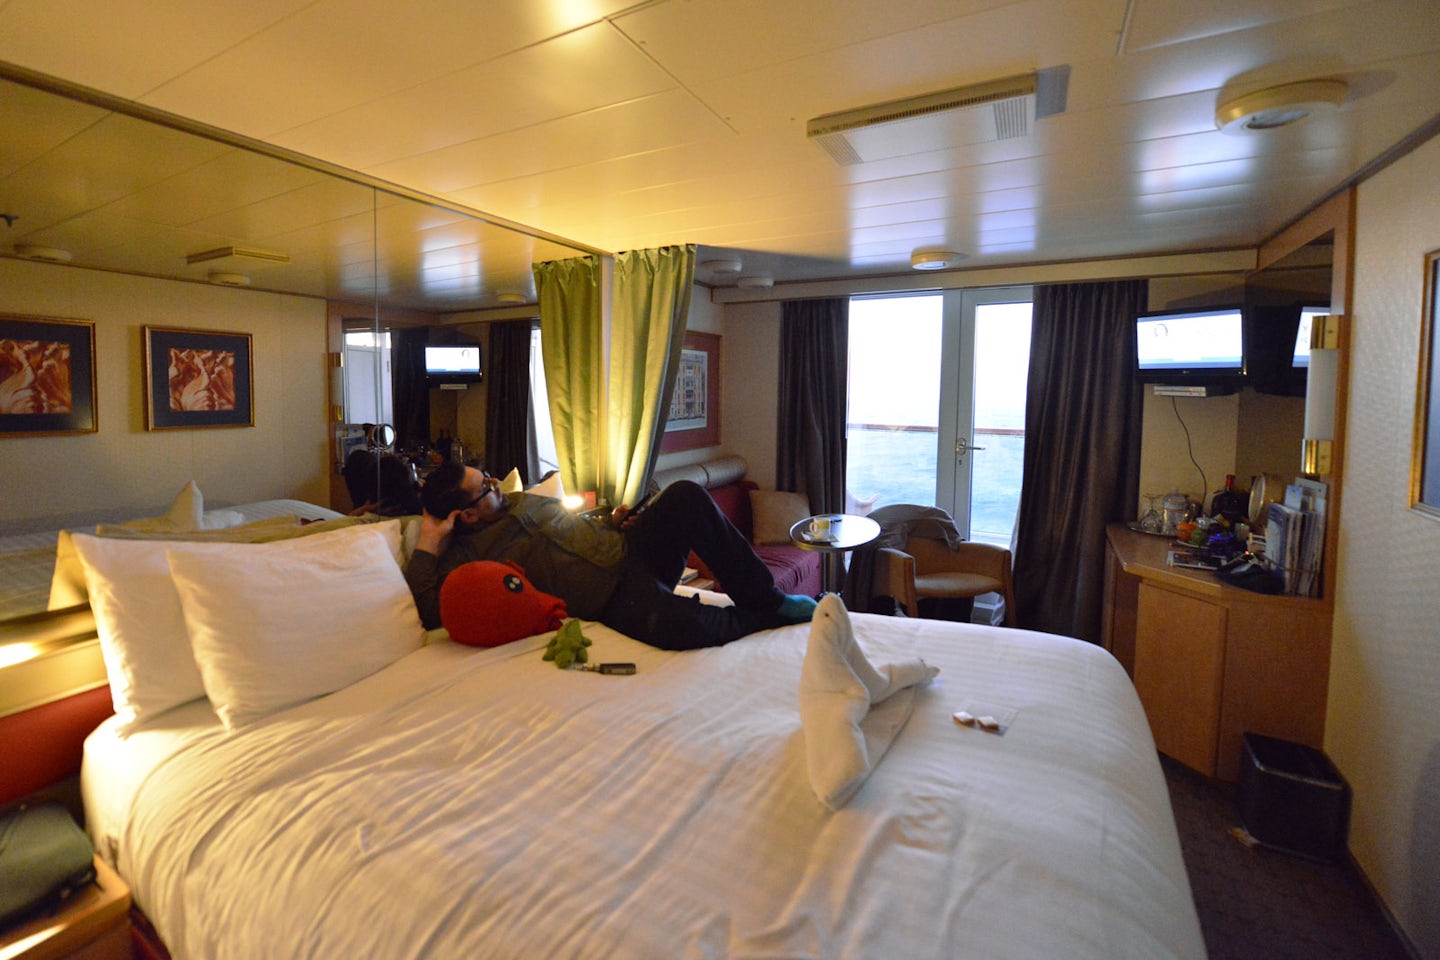 Verandah Cabin on Deck 7. We found it spacious and the balcony was great